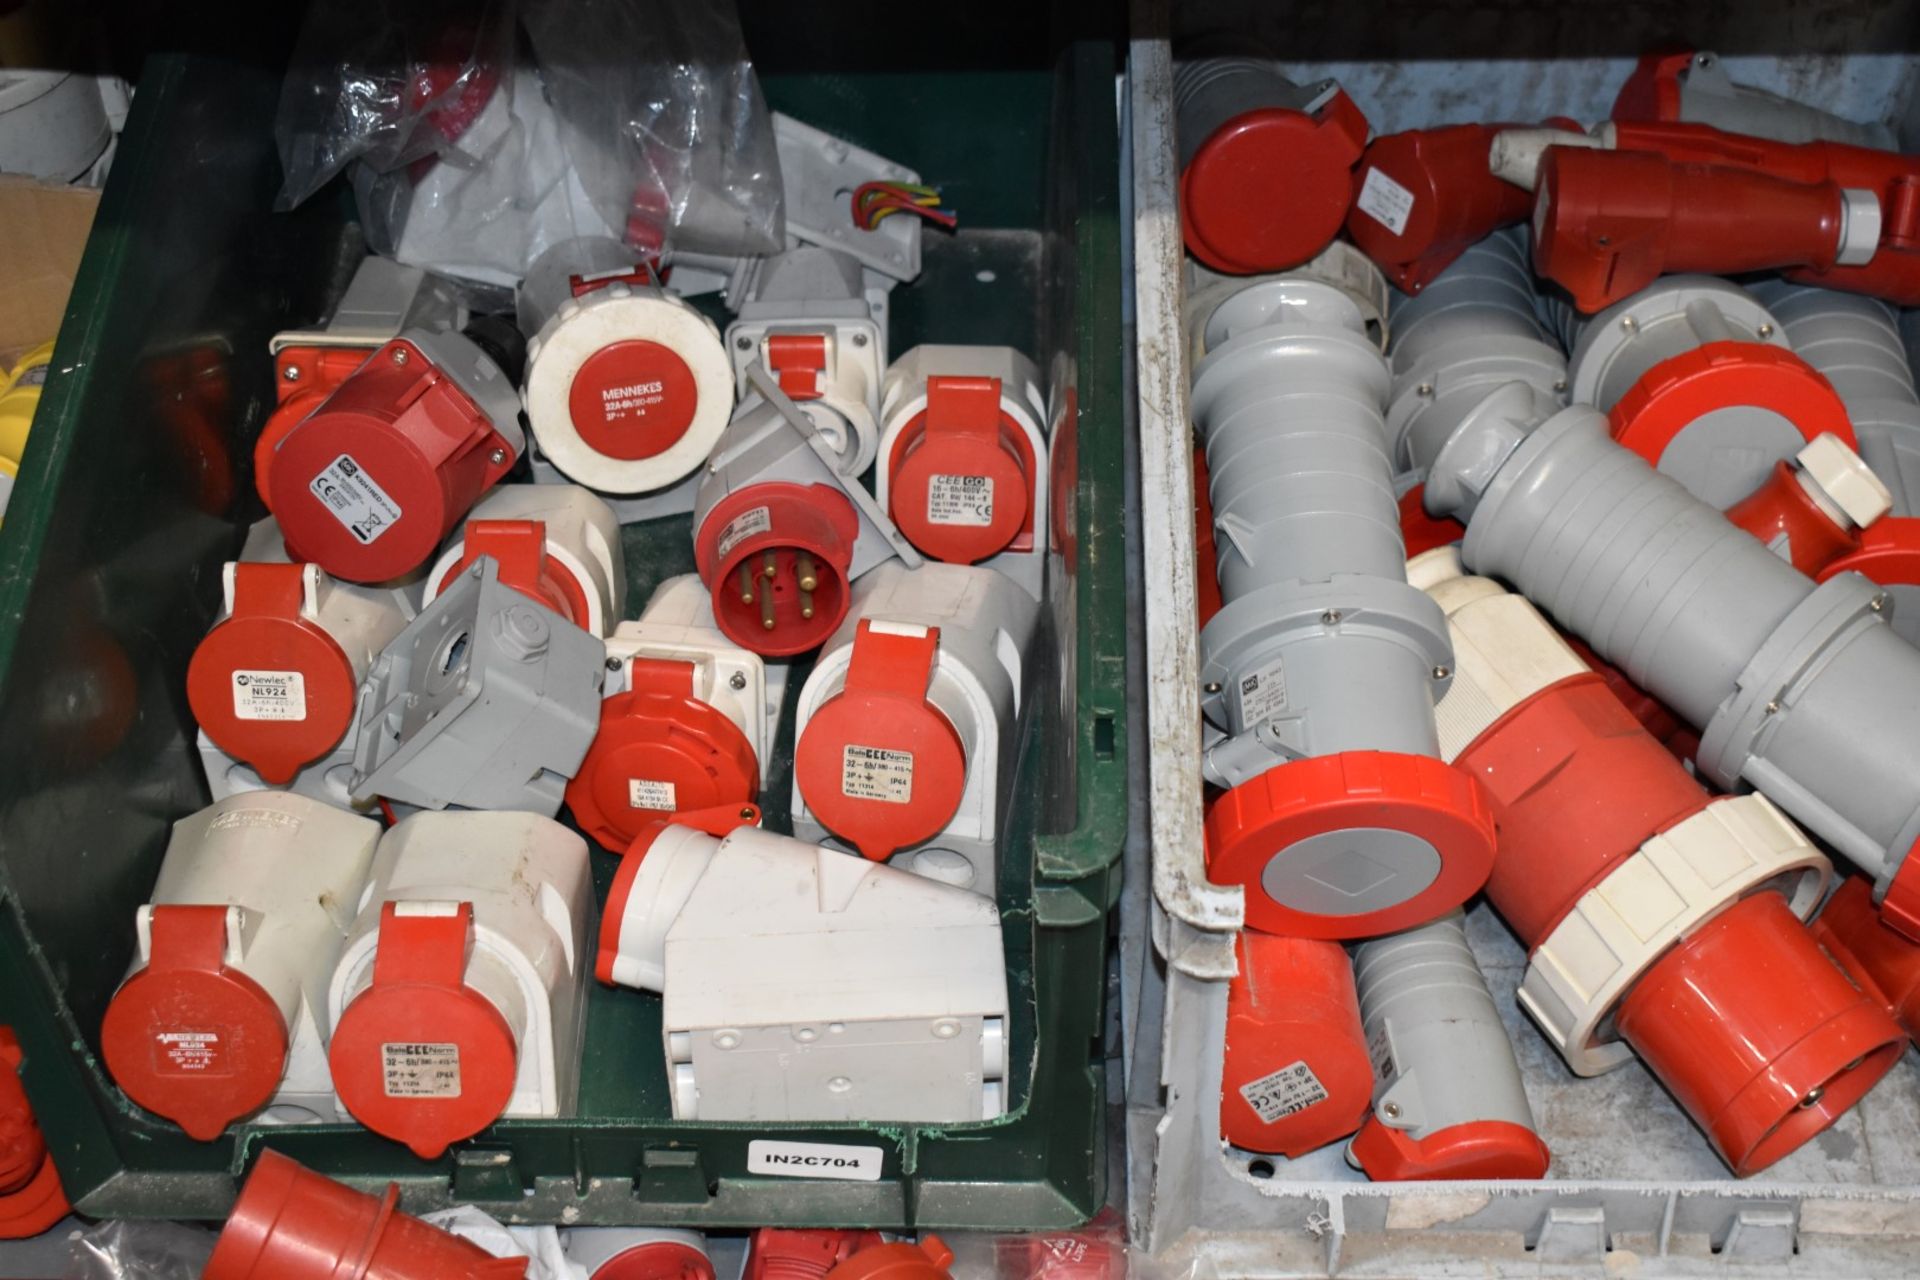 4 x Linbins With Contents - Includes Large Quantity of Industrial 3 Phase Plugs / Sockets - Image 4 of 17